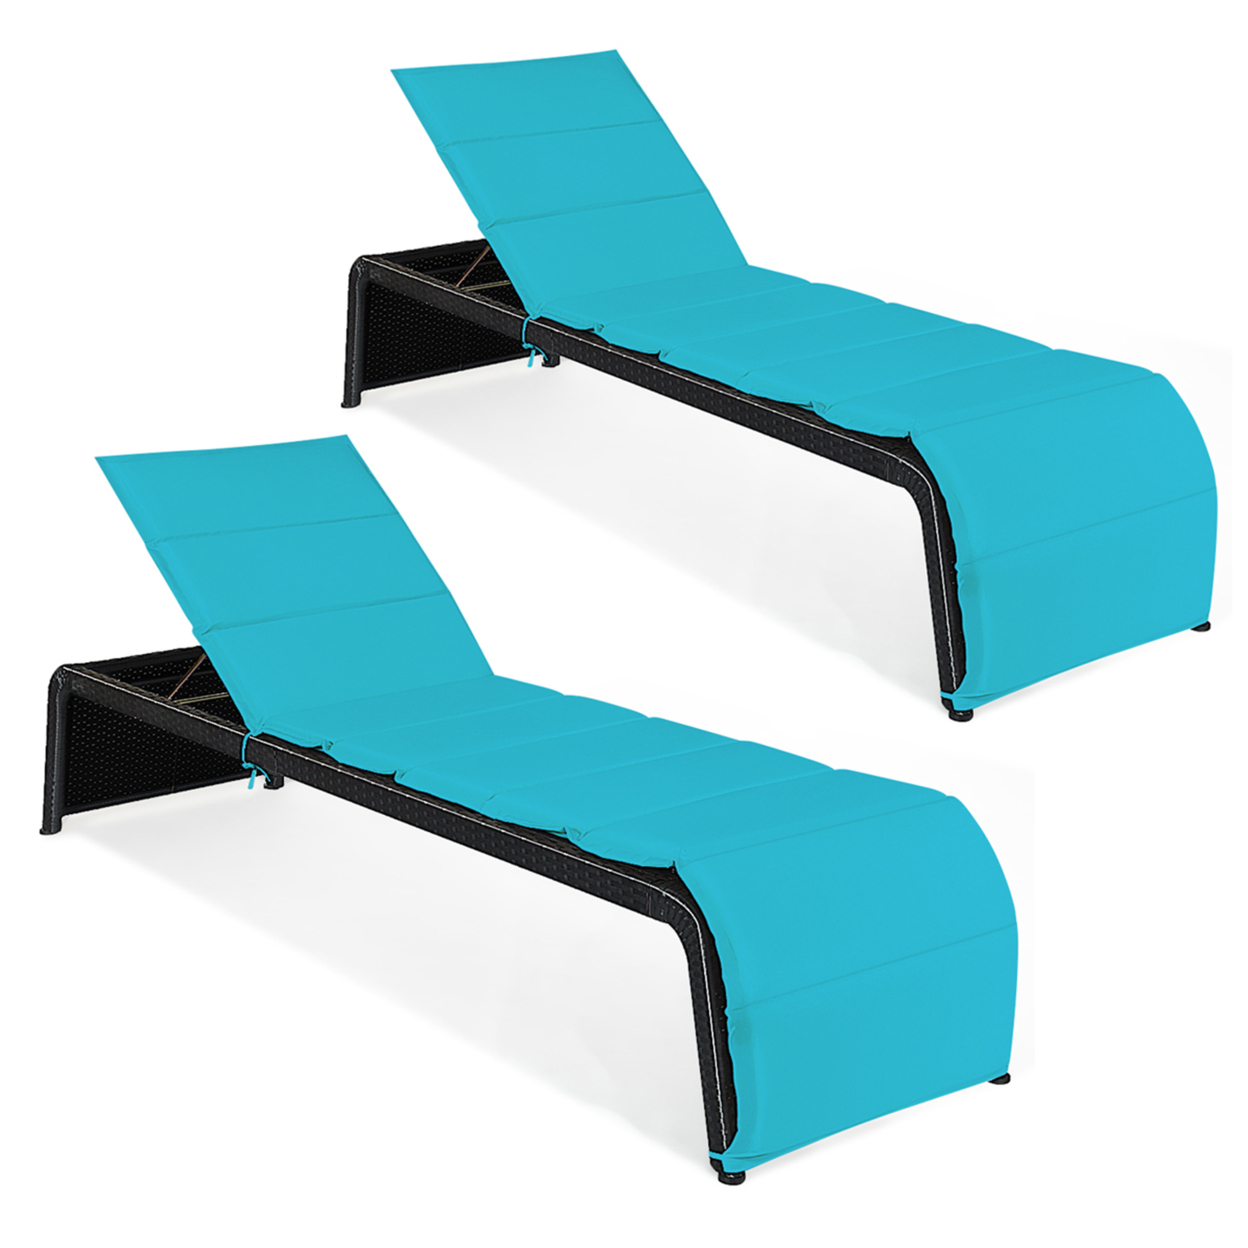 Set Of 2 Adjustable Rattan Patio Recliner Chaise Lounge Chair W/ Turquoise Cushion